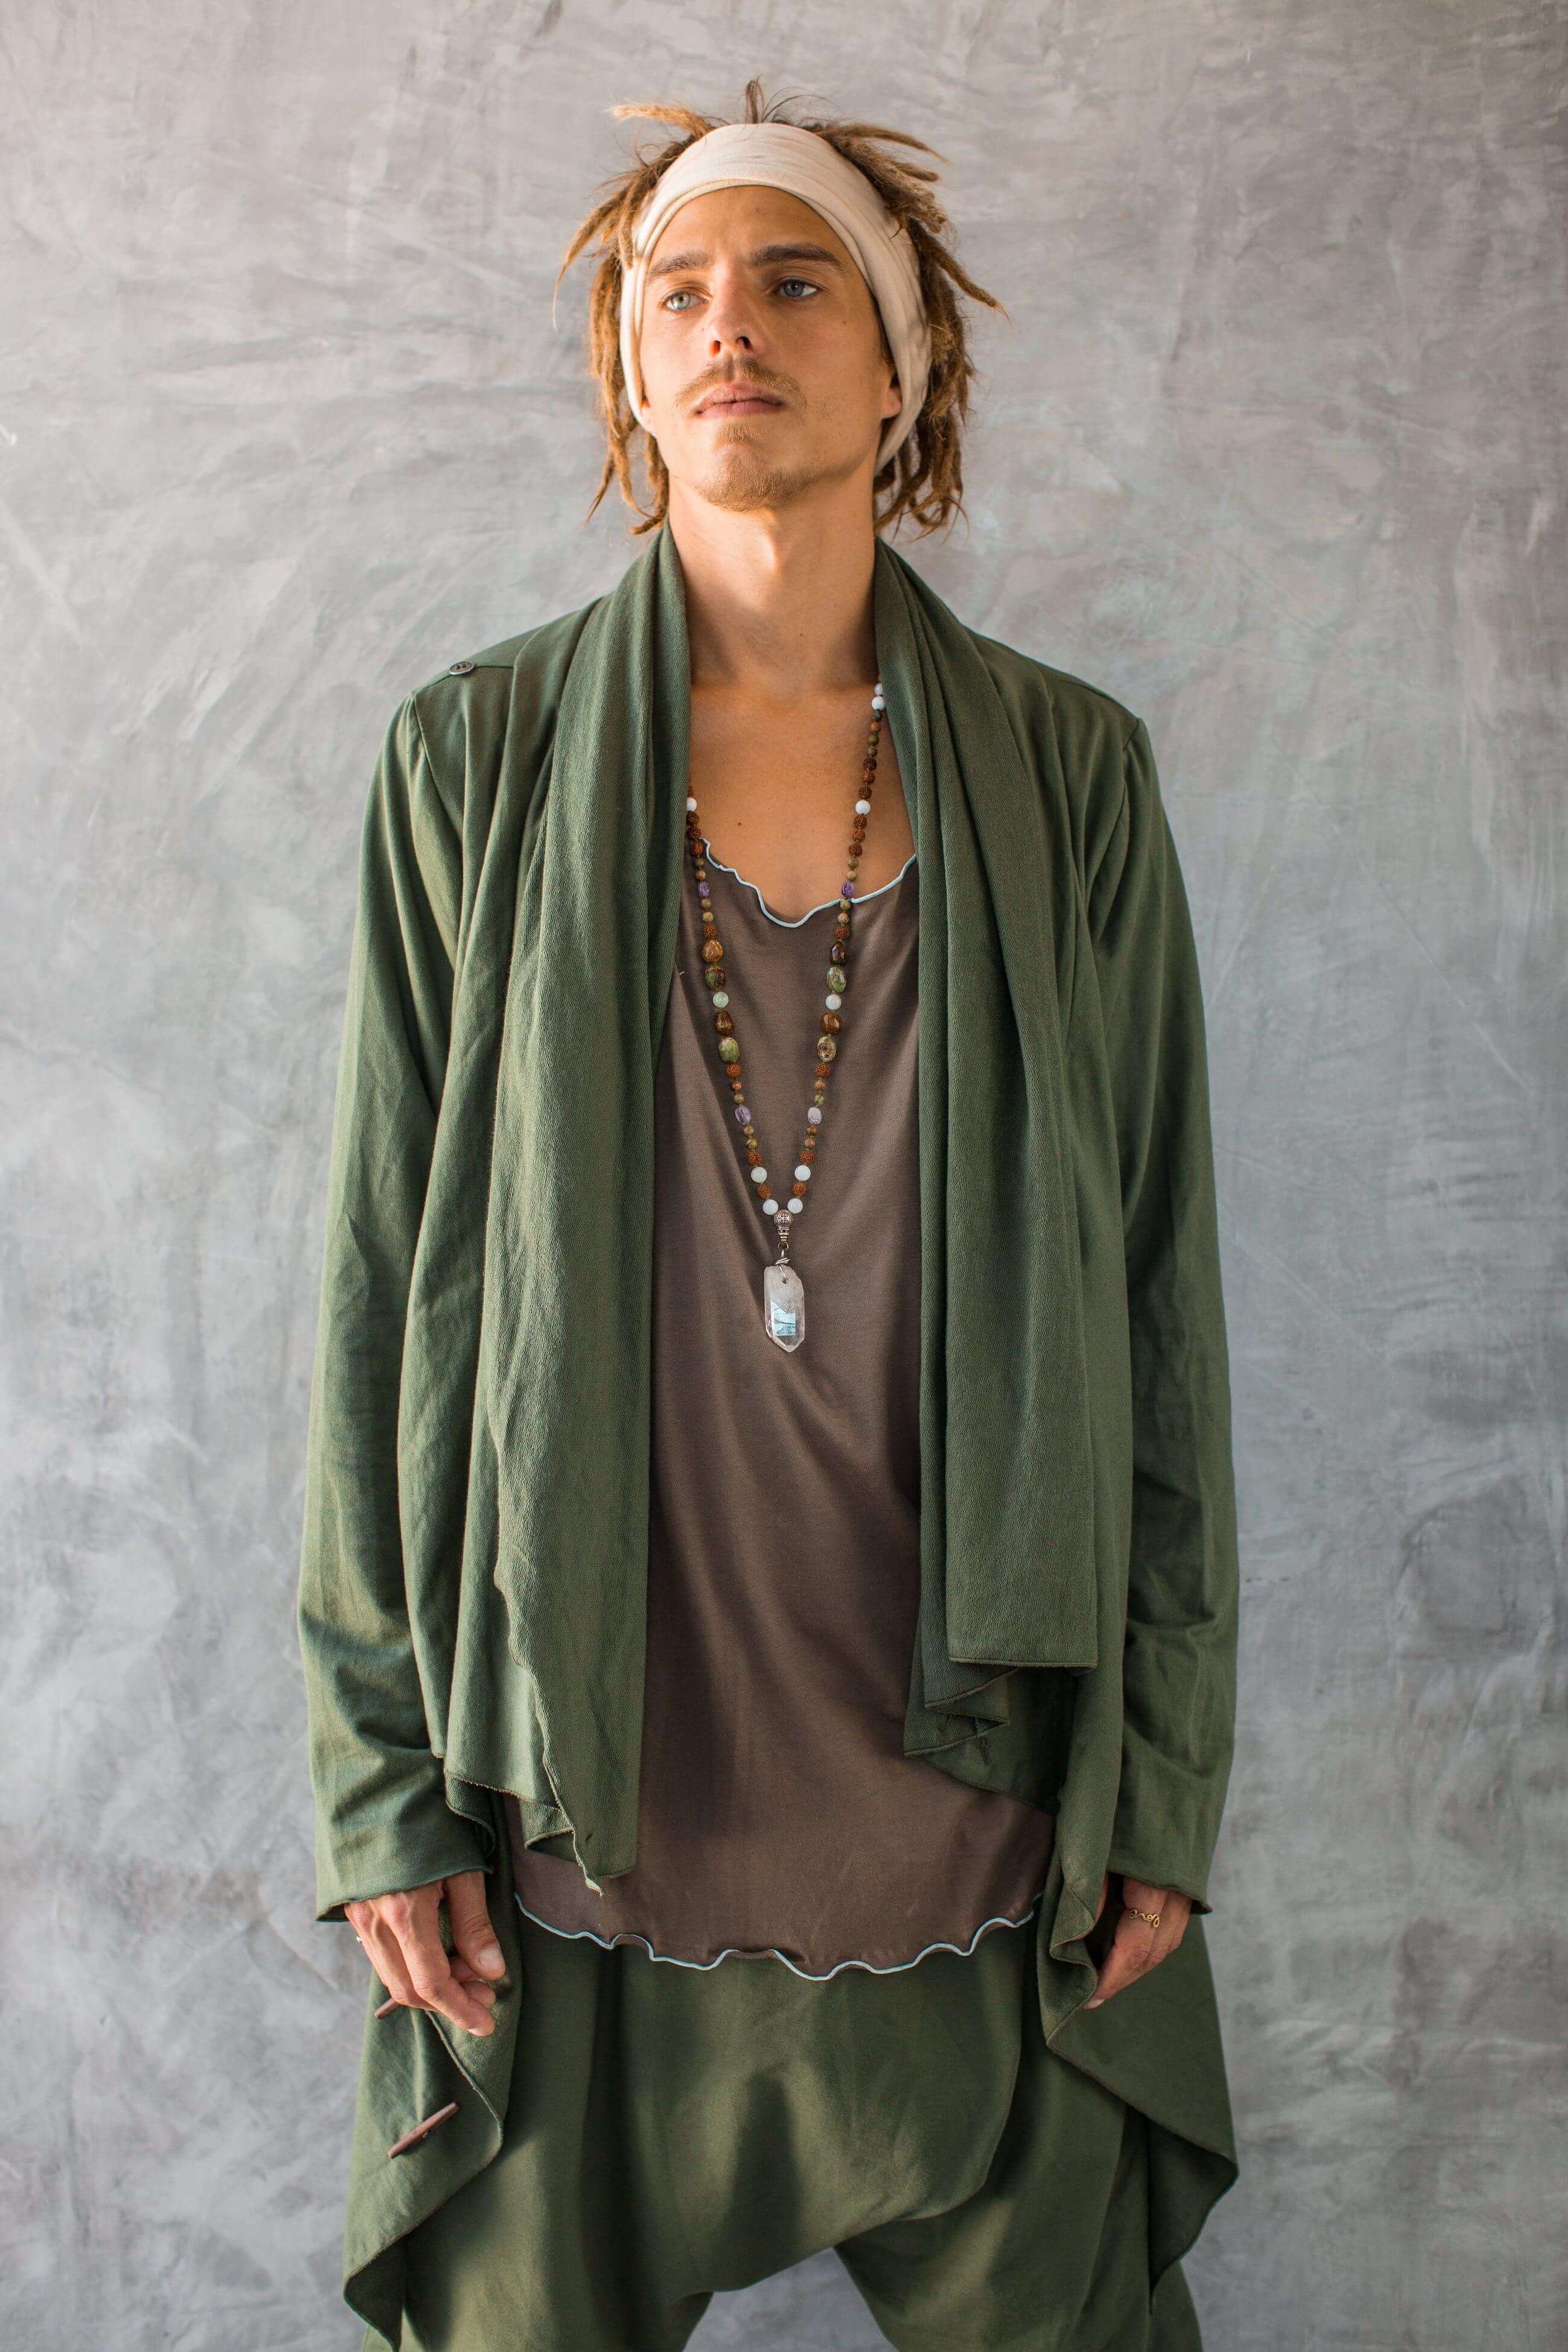 VALO Design Clothing Hoodies KENOBI Forest Green - Jedi style cotton hoodie with wooden buttons